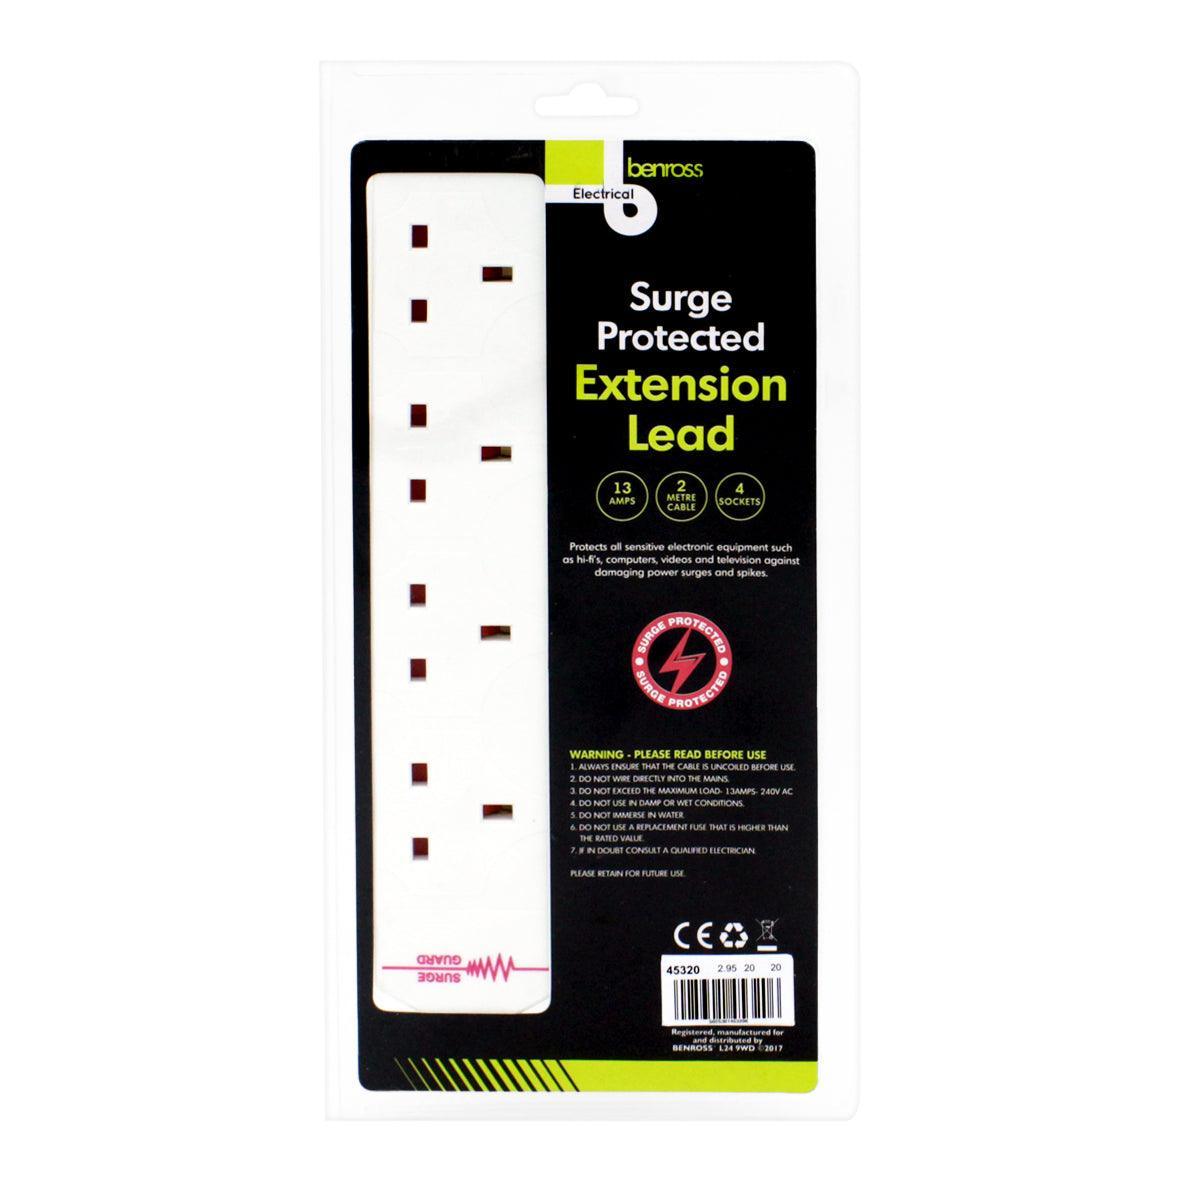 Benross Extension Cable 4 Gang 2m 45320 with Surge Protection - Choice Stores